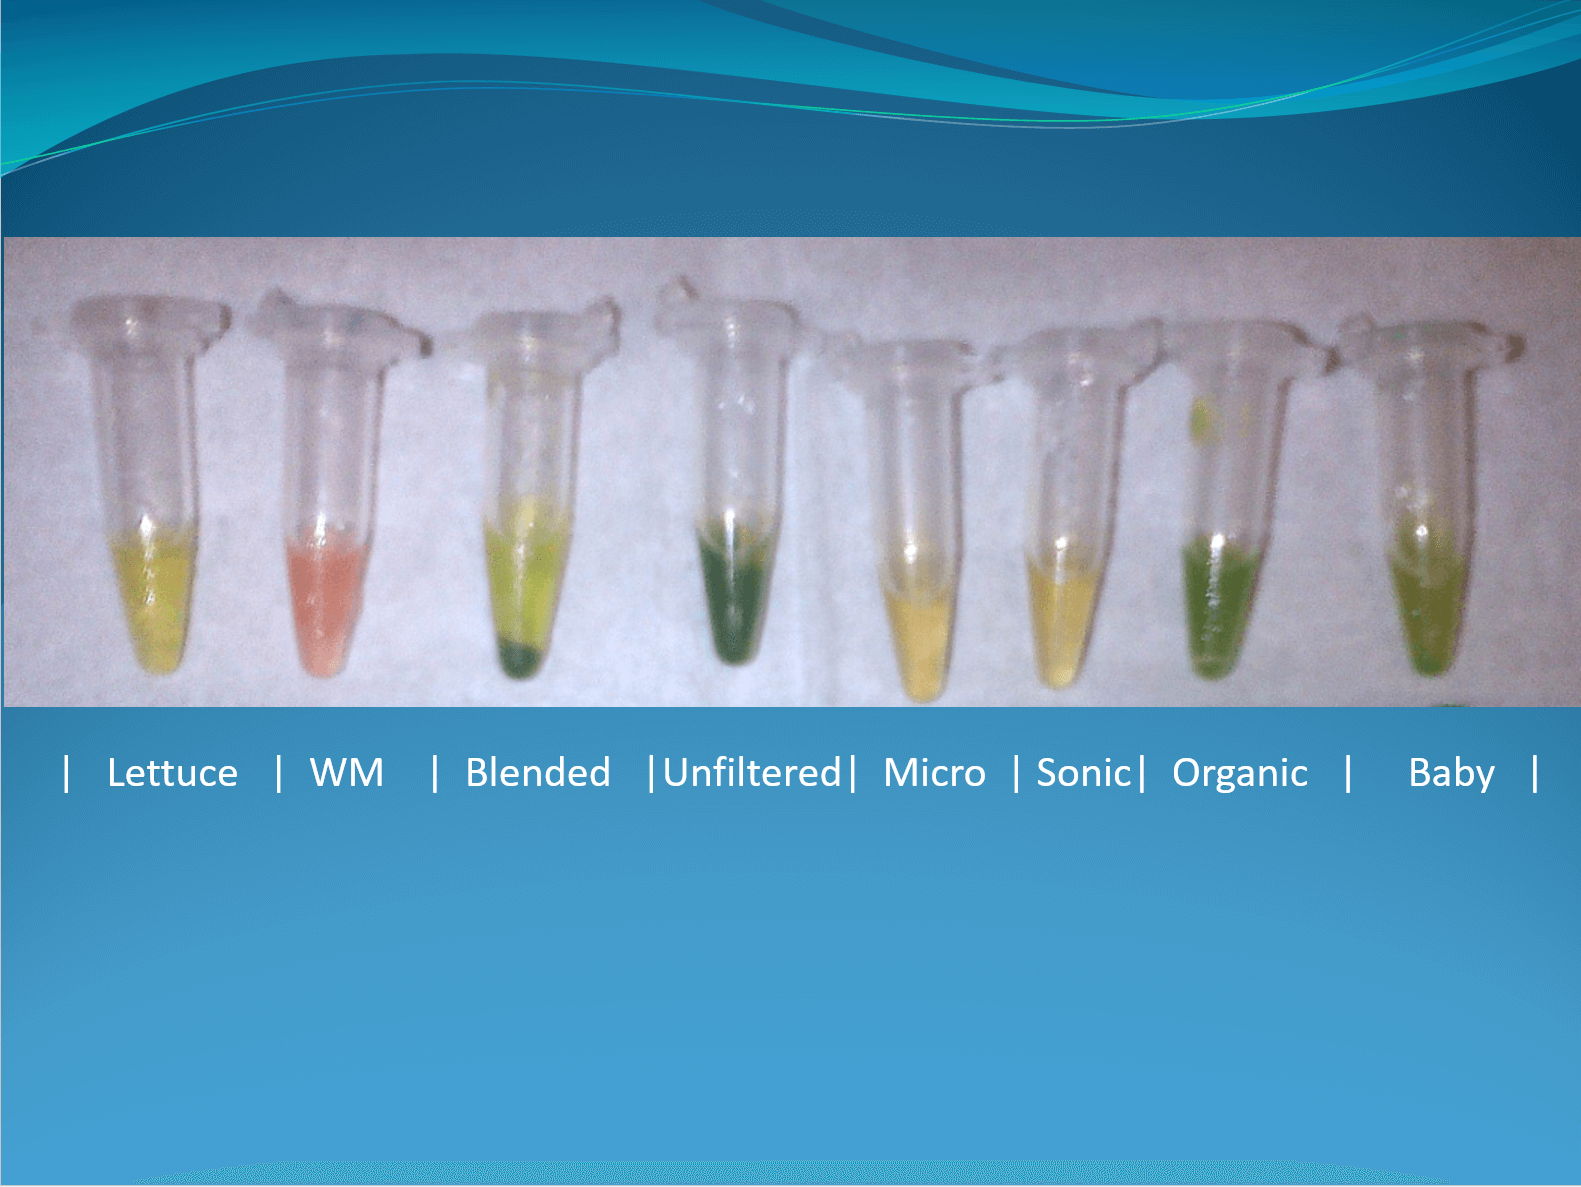 Powerpoint slide demonstrating the efficacy of various vegetable juices, including juiced curly kale, in killing melanoma cells, presented by Bilal Qizilbash at UFS Yale 2015.